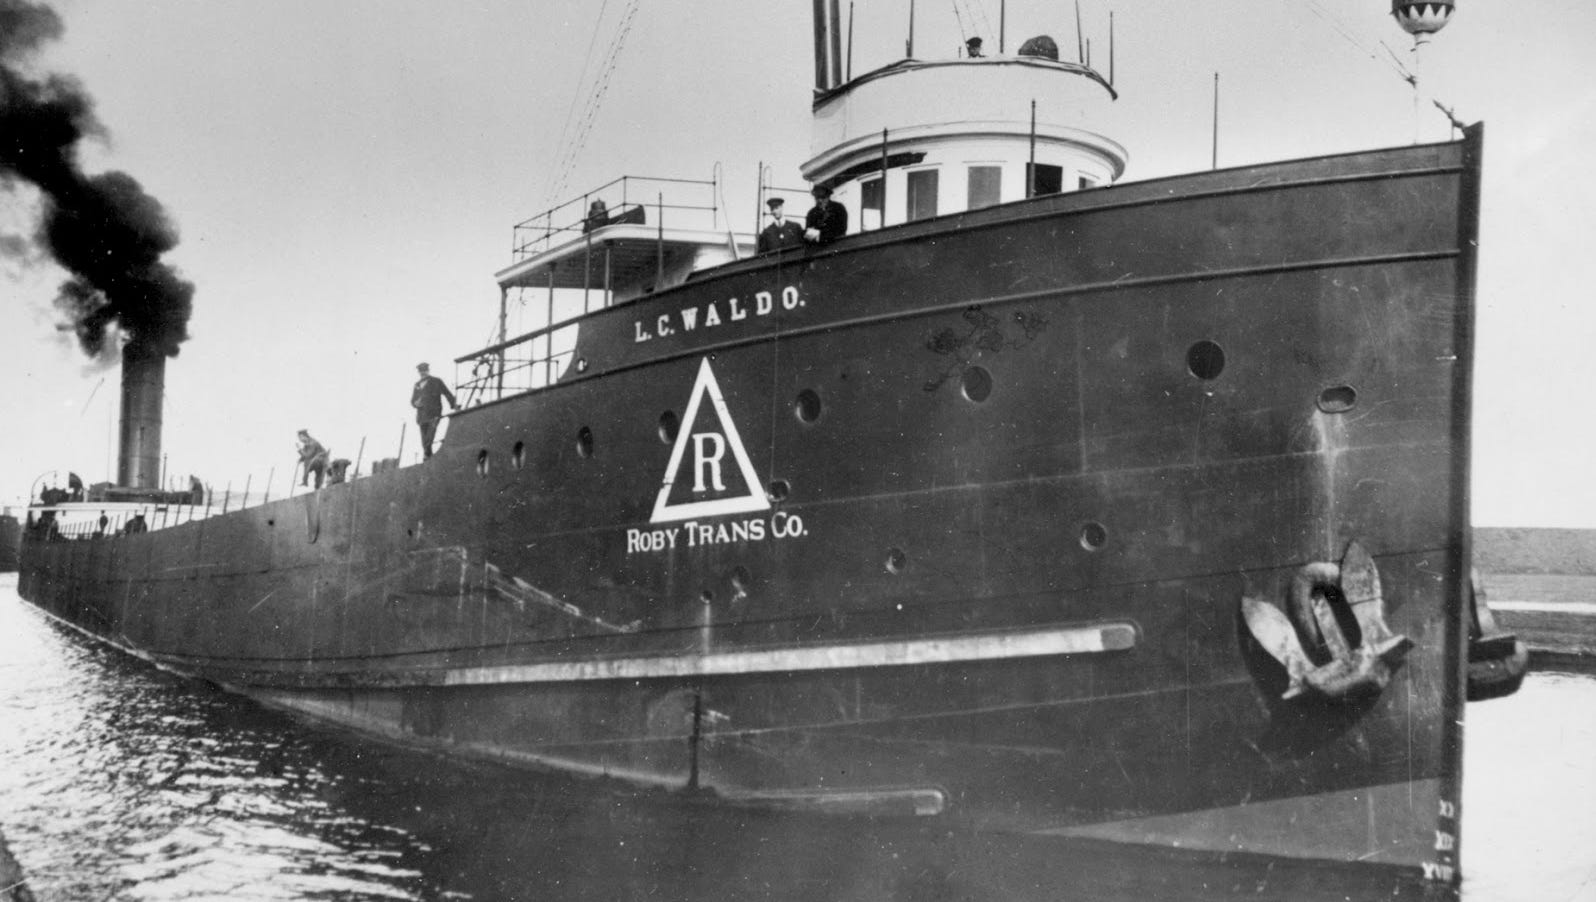 The L.C. Waldo, a 450-foot freighter loaded with ore, encountered fierce winds that tore away the pilot house and damaged the steering.  In attempting to reach L'anse Bay in Lake Superior's Keweenaw Peninsula, it ran aground and broke in two. The crew took shelter in the forward end of the steamer and waited for four days before rescuers could reach them.